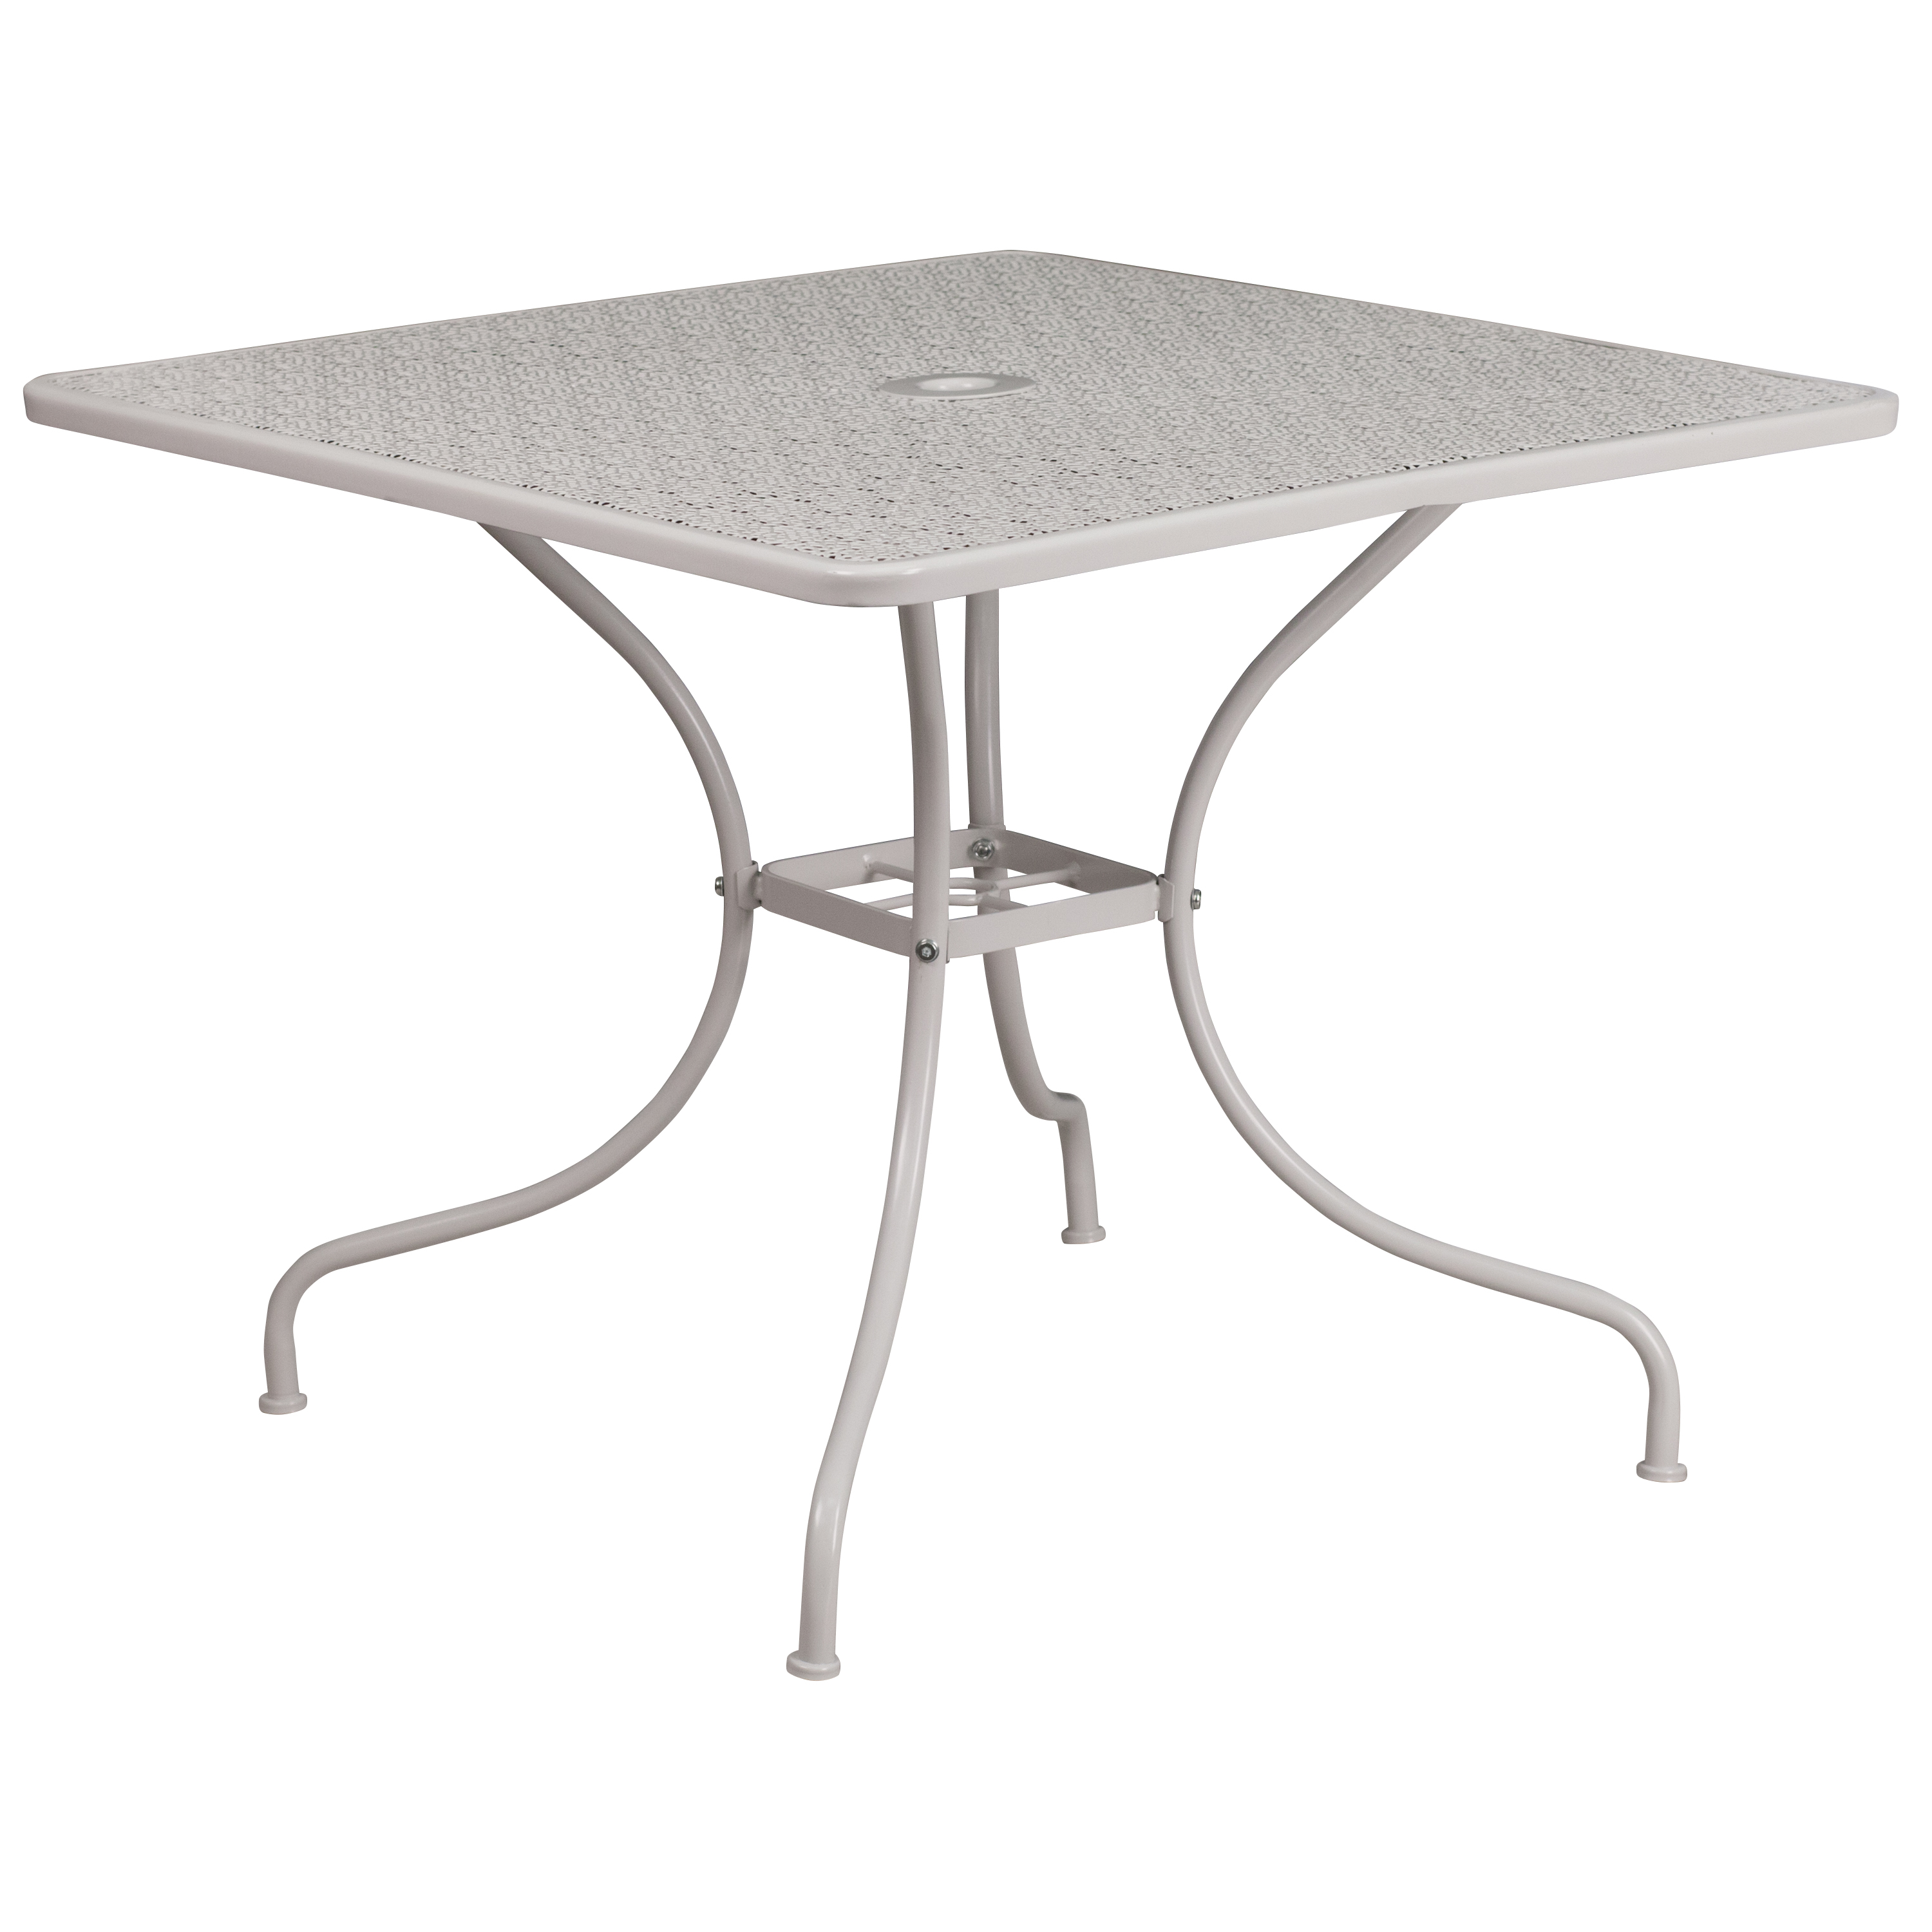 Flash Furniture Oia Commercial Grade 35.5" Square Light Gray Indoor-Outdoor Steel Patio Table Set with 4 Square Back Chairs - image 4 of 5